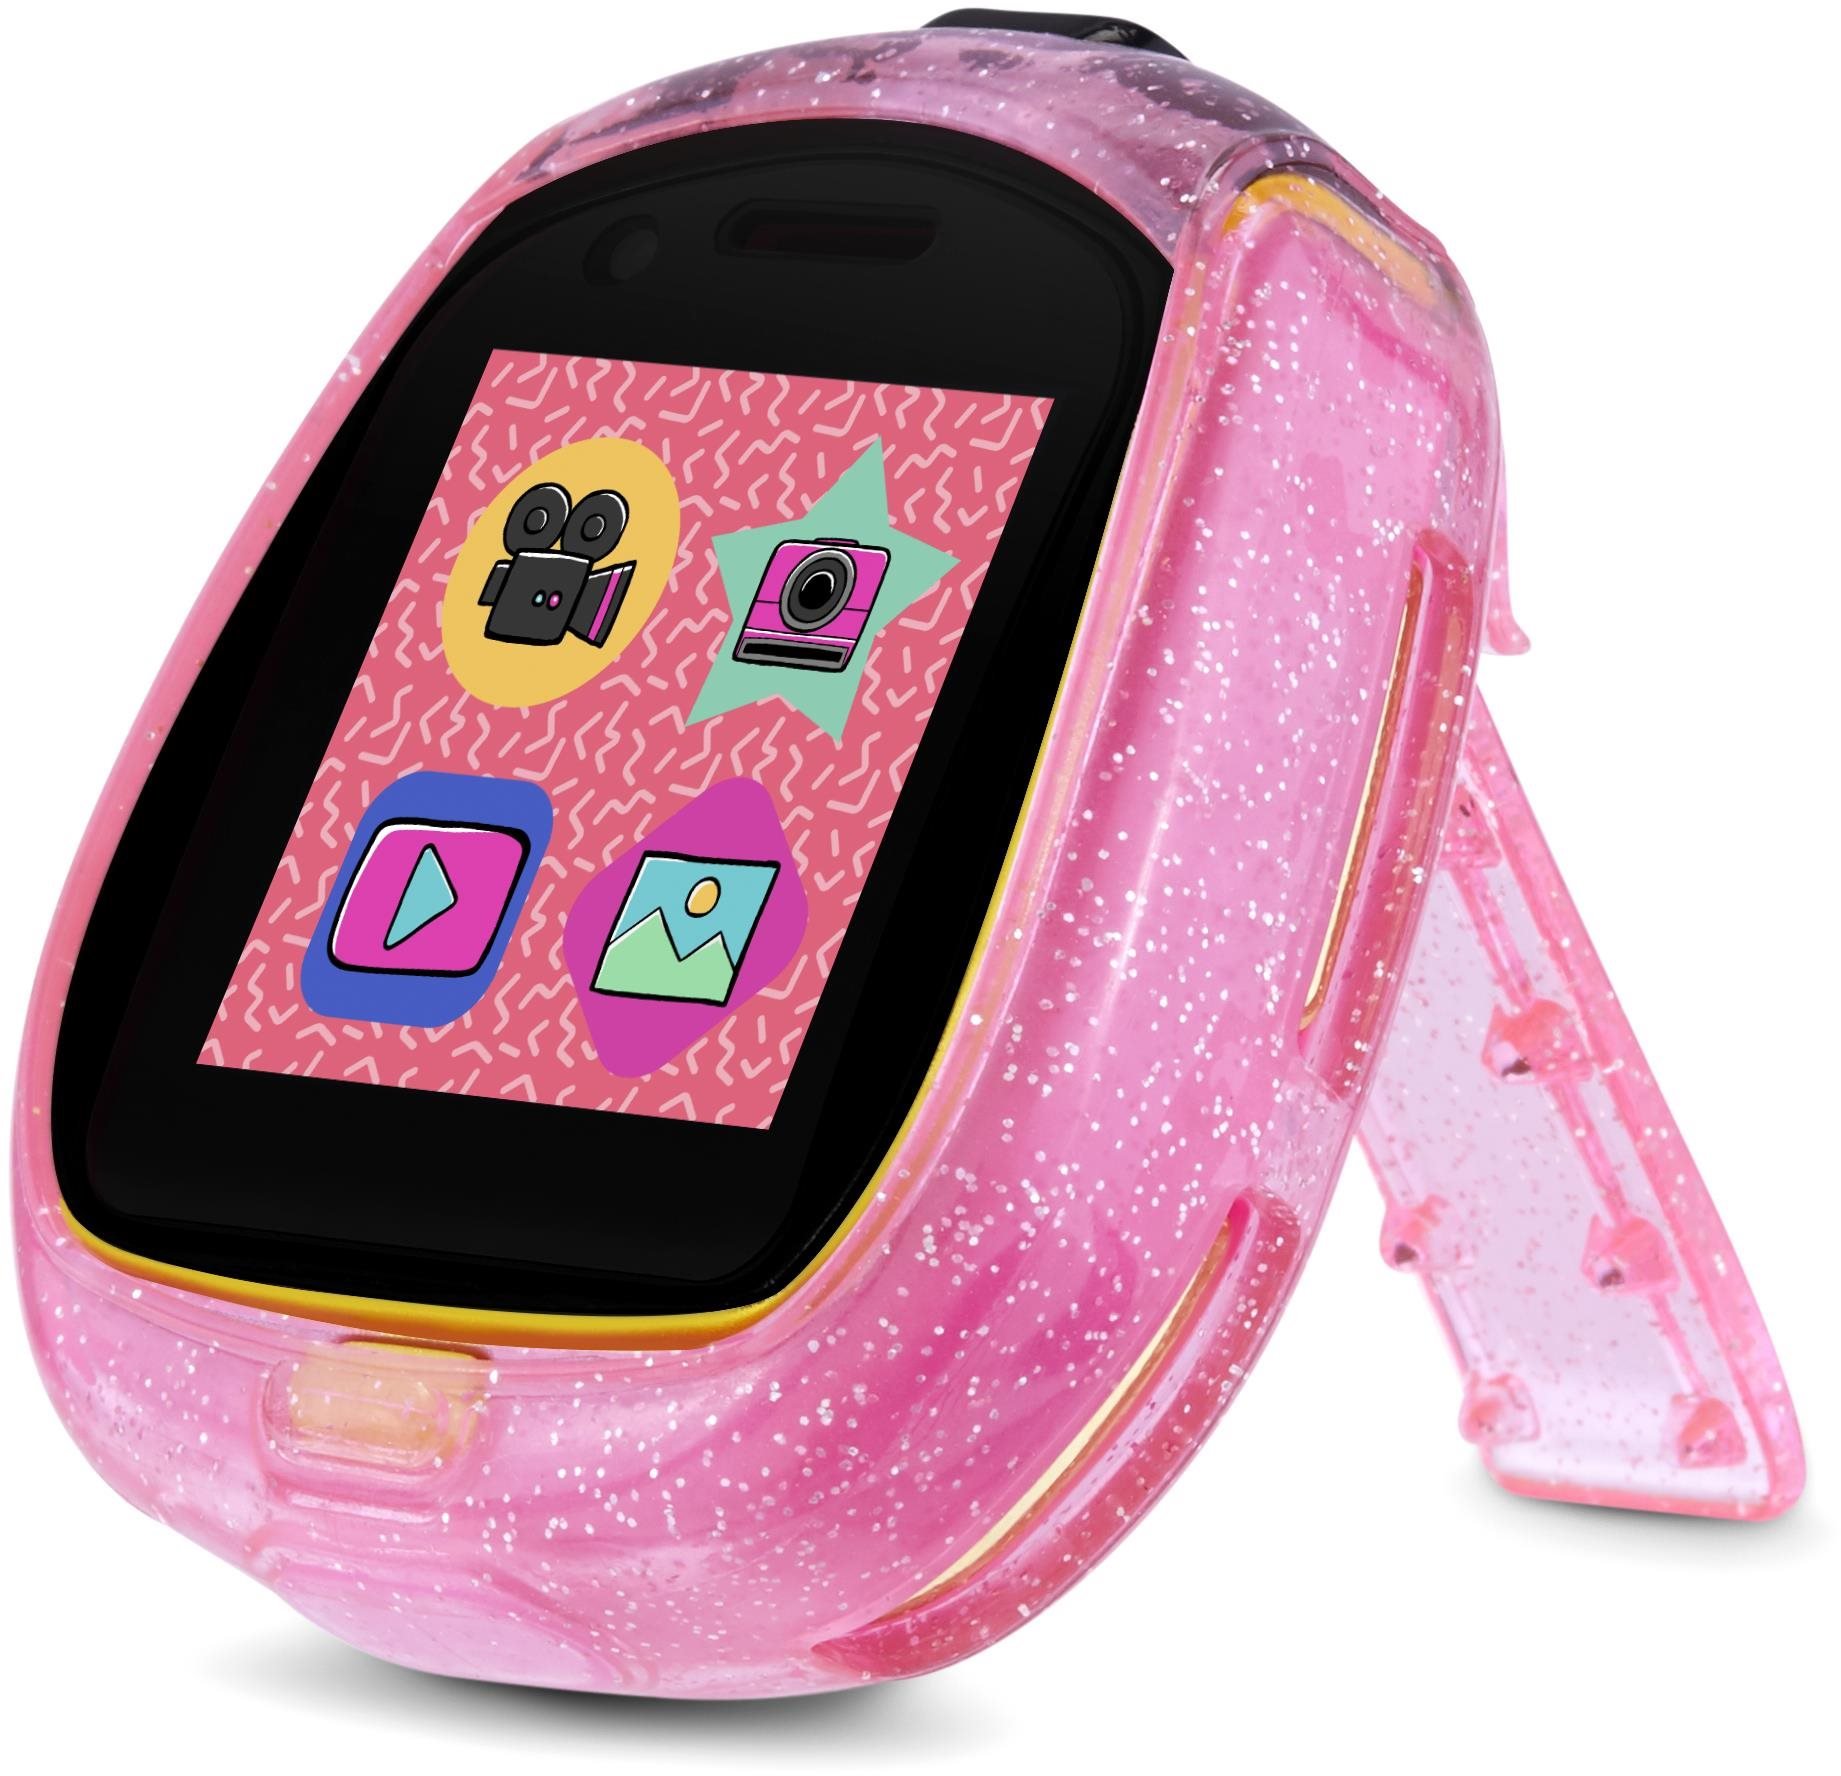 Style Freak L.O.L. Surprise 24-Images Digital Display Projector Cartoon  Watch for Kids Set of - 1 Digital Watch - For Girls - Buy Style Freak L.O.L.  Surprise 24-Images Digital Display Projector Cartoon